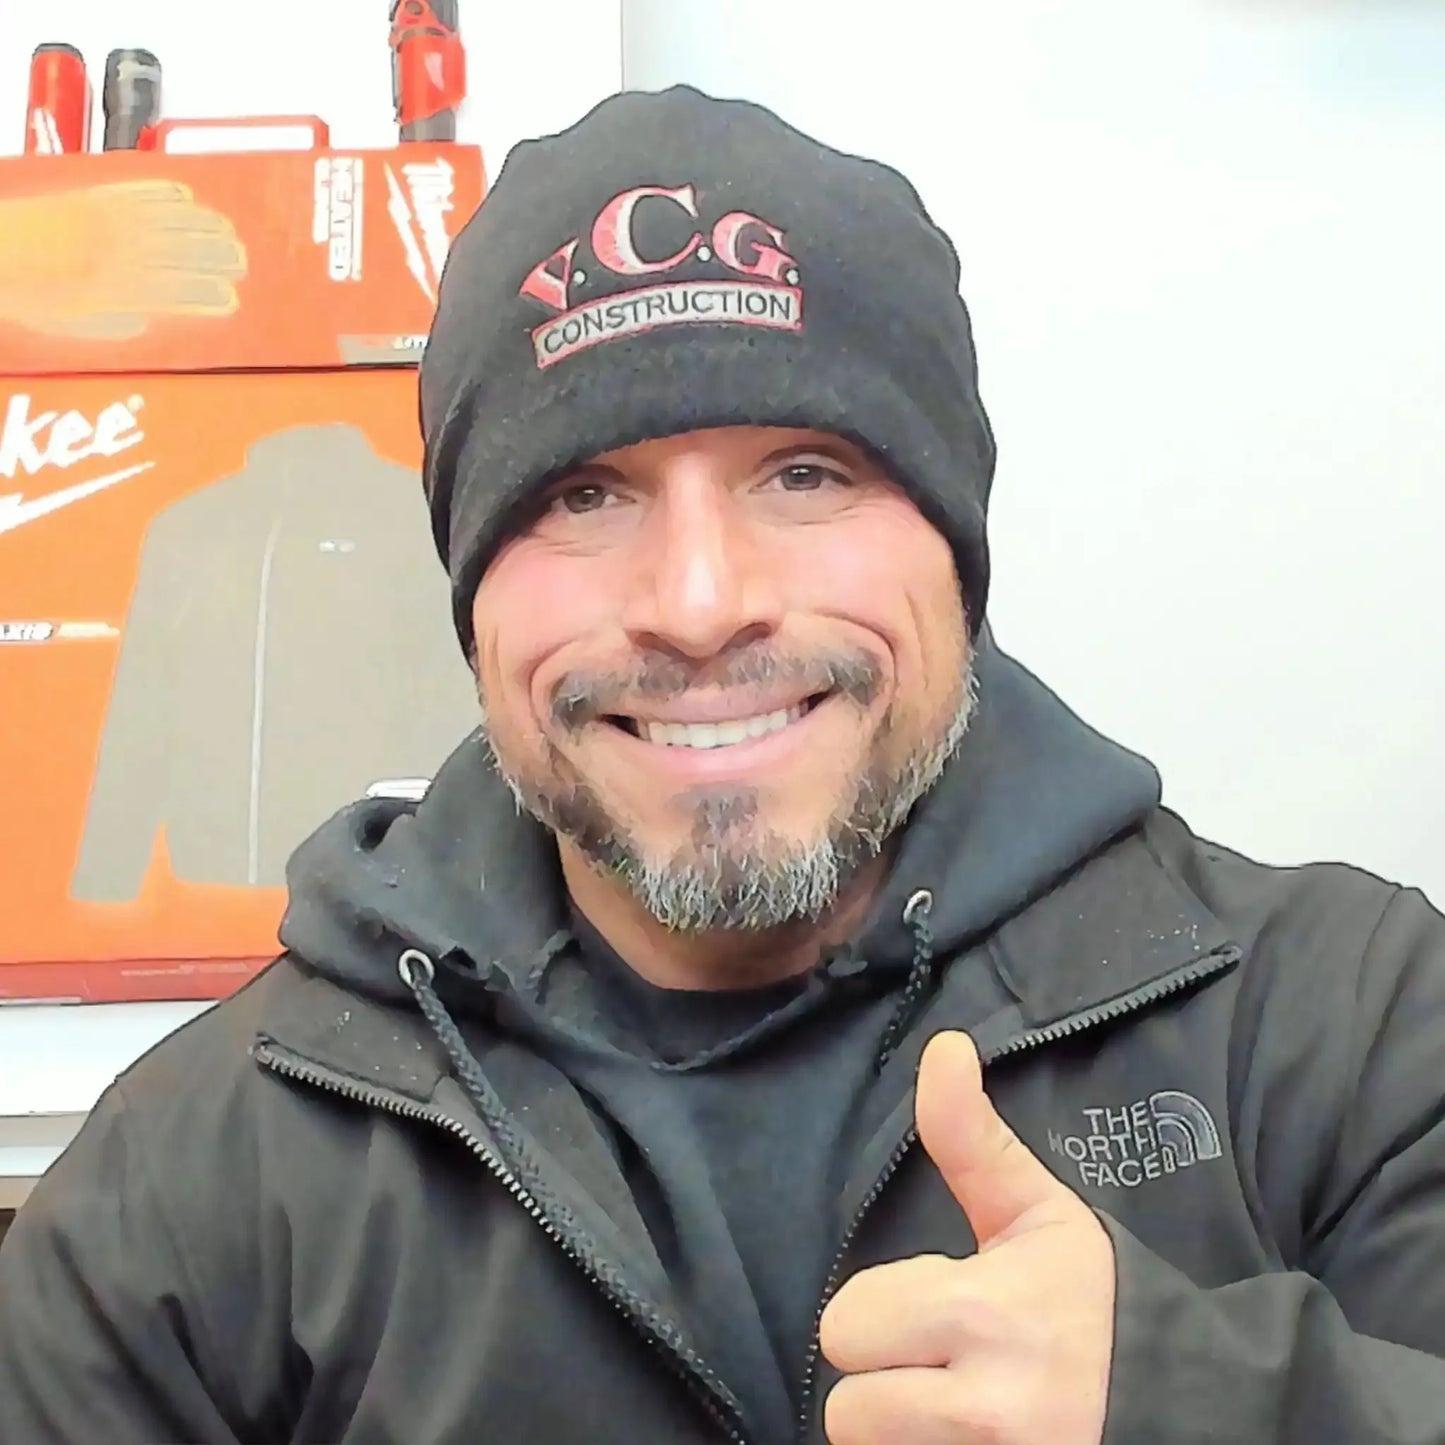 Vince showcasing style in the #VeryCoolGang Construction Cold Weather Hat – Stay warm, stay cool, and join the crew with this must-have accessory!